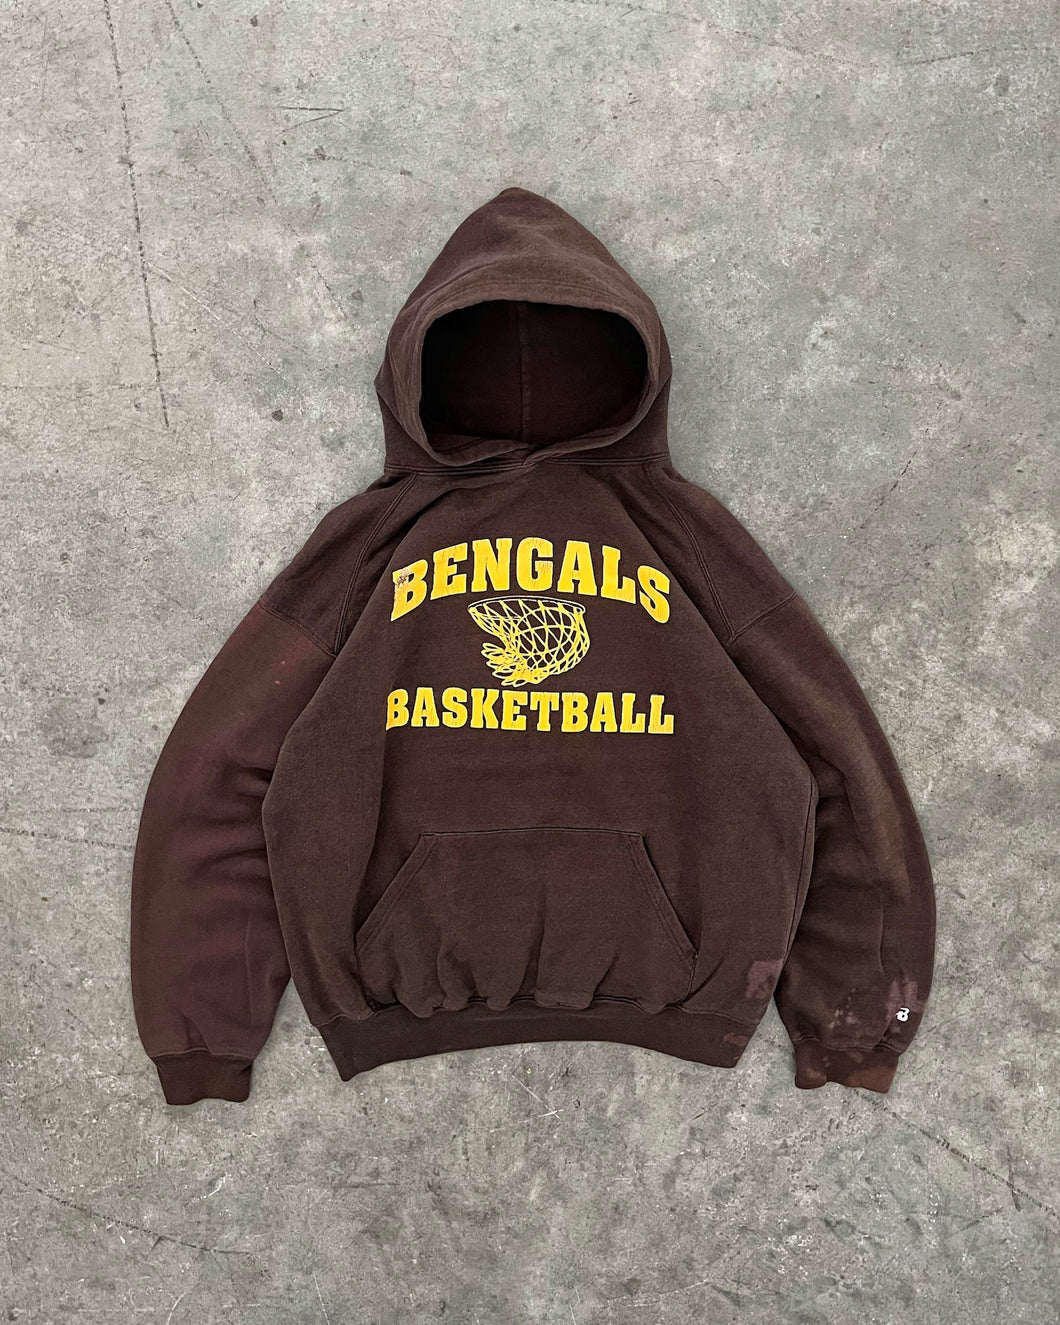 FADED BROWN “BENGALS BASKETBALL” HEAVYWEIGHT HOODIE - 1990S